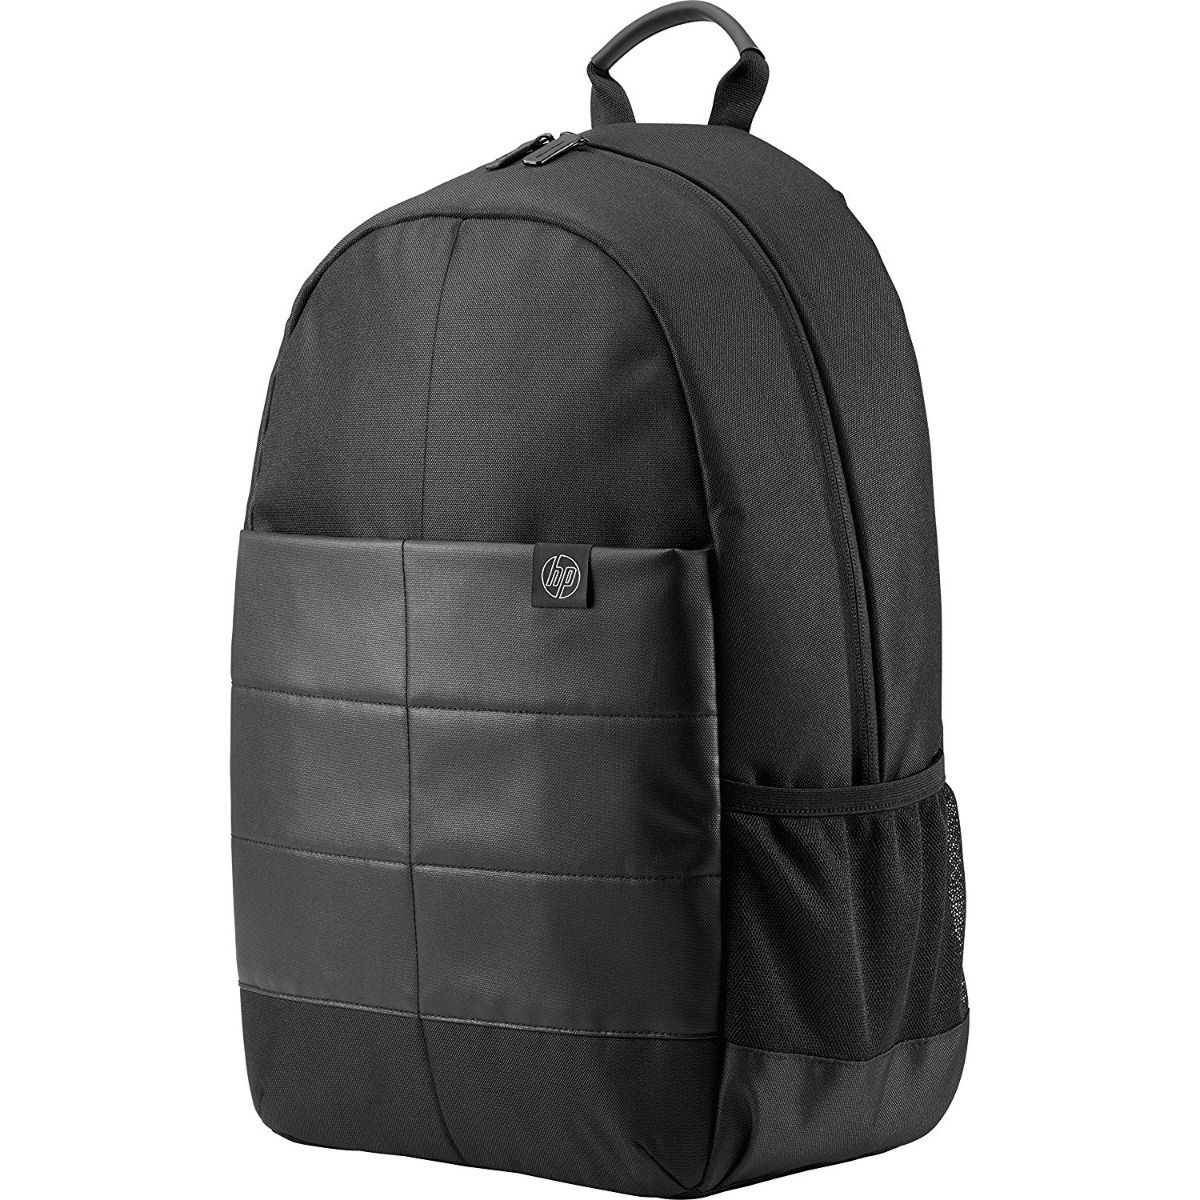 HP Laptop 15.6 Classic Backpack Black